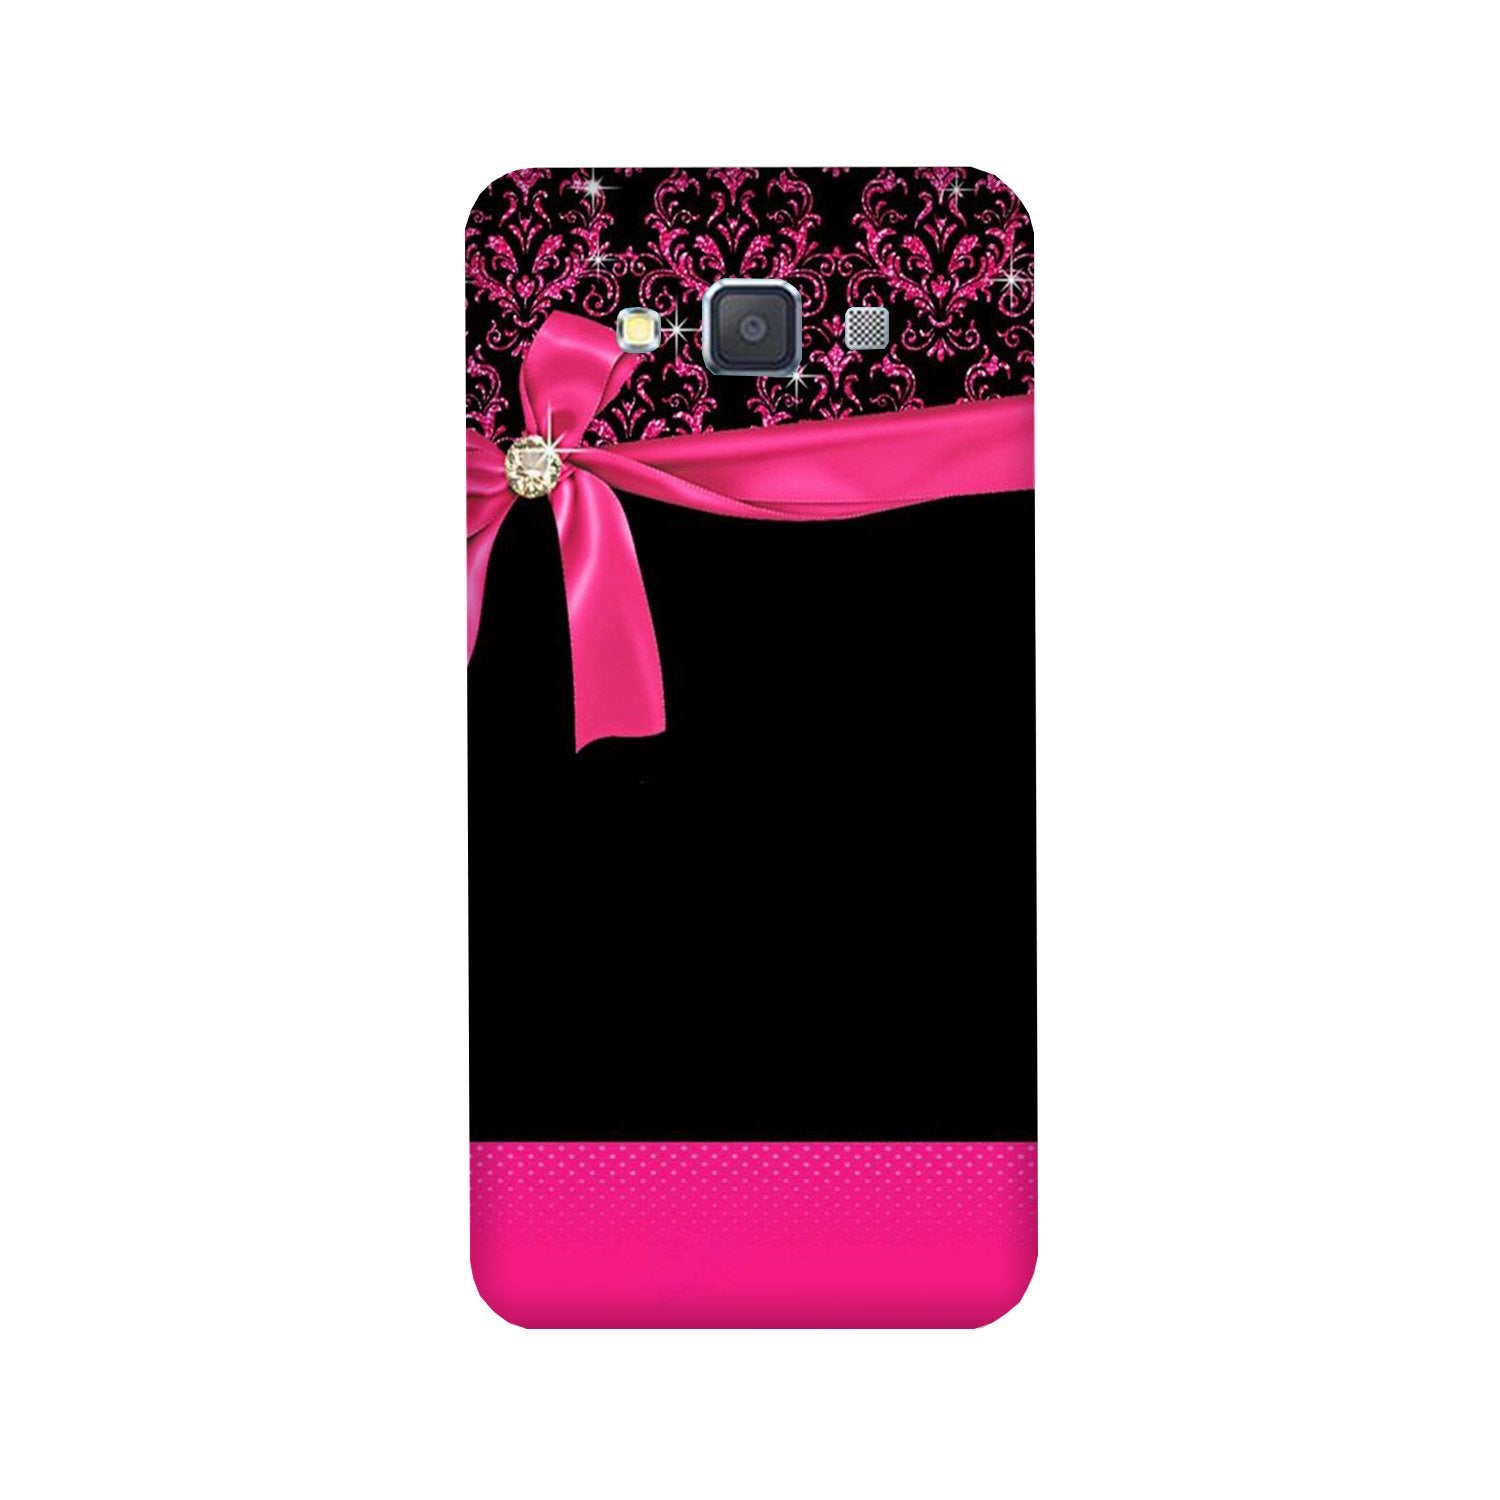 Gift Wrap4 Case for Galaxy J7 (2016)